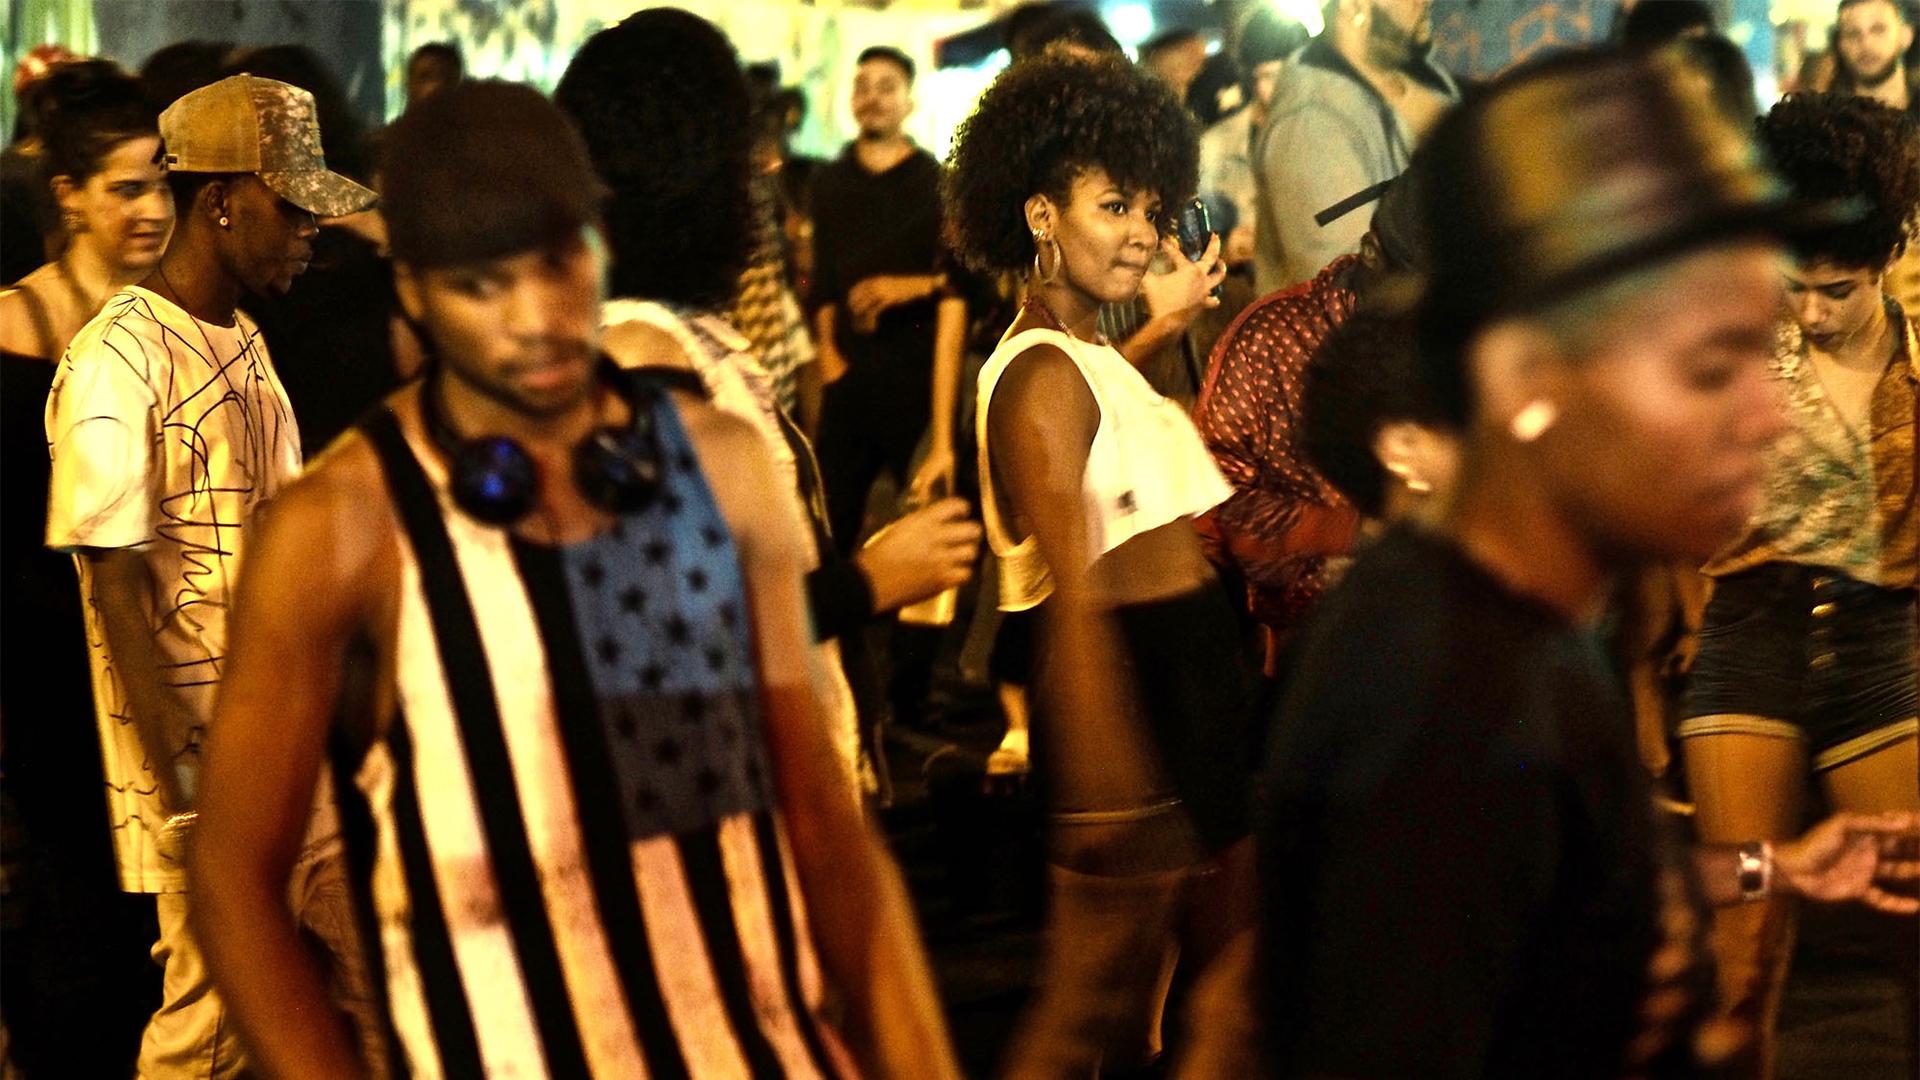 Dancers at the weekly Saturday night charme dance in Madureira